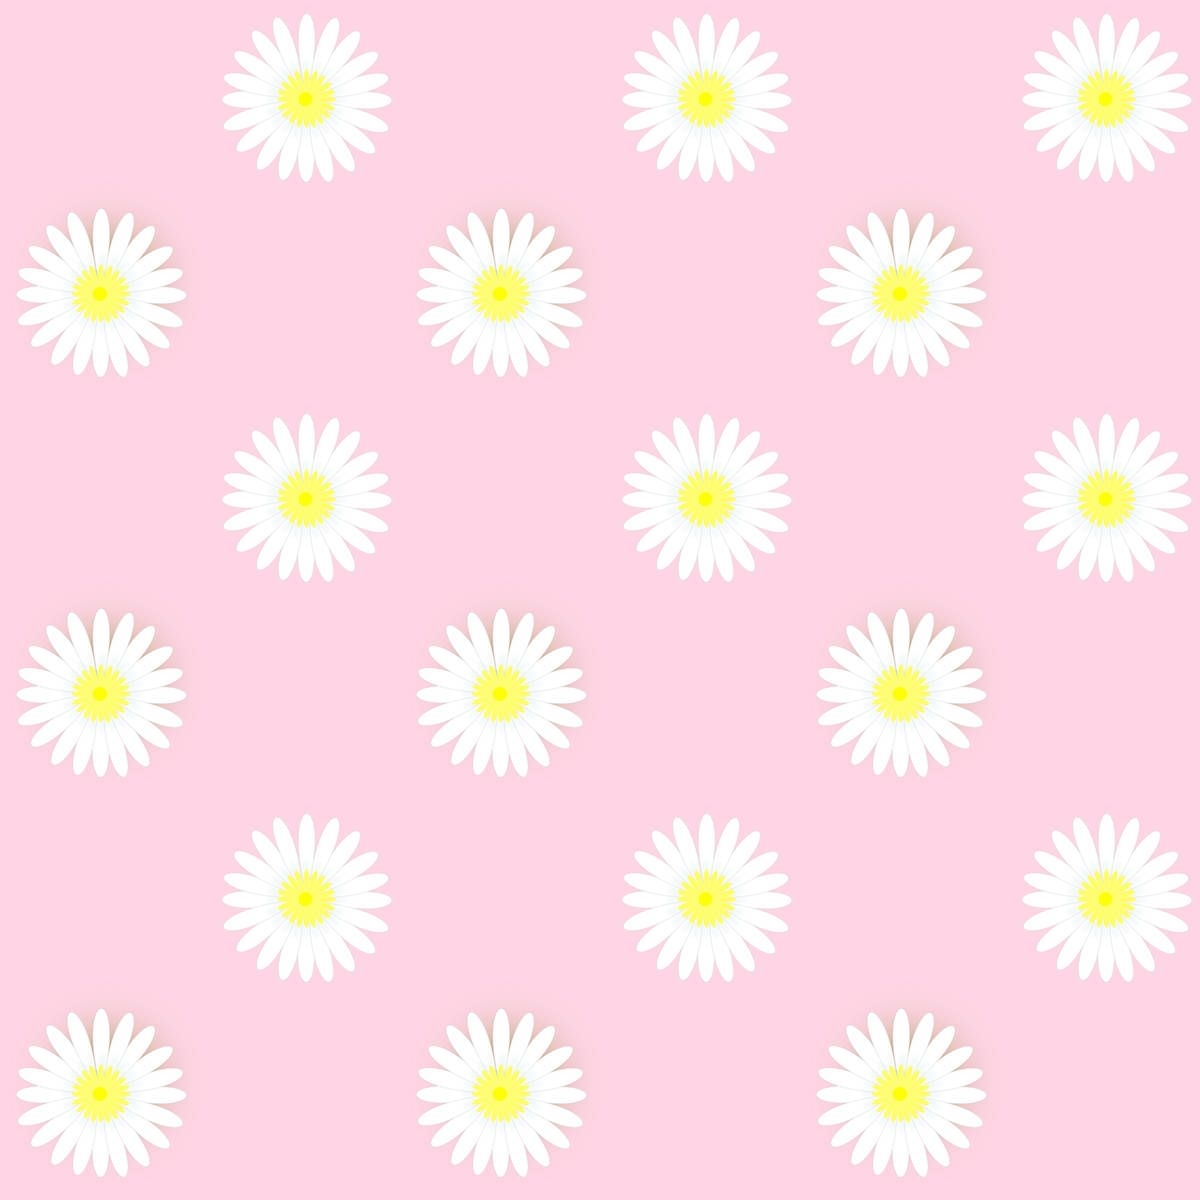 White Daisy Patterned In Pastel Pink Wallpaper